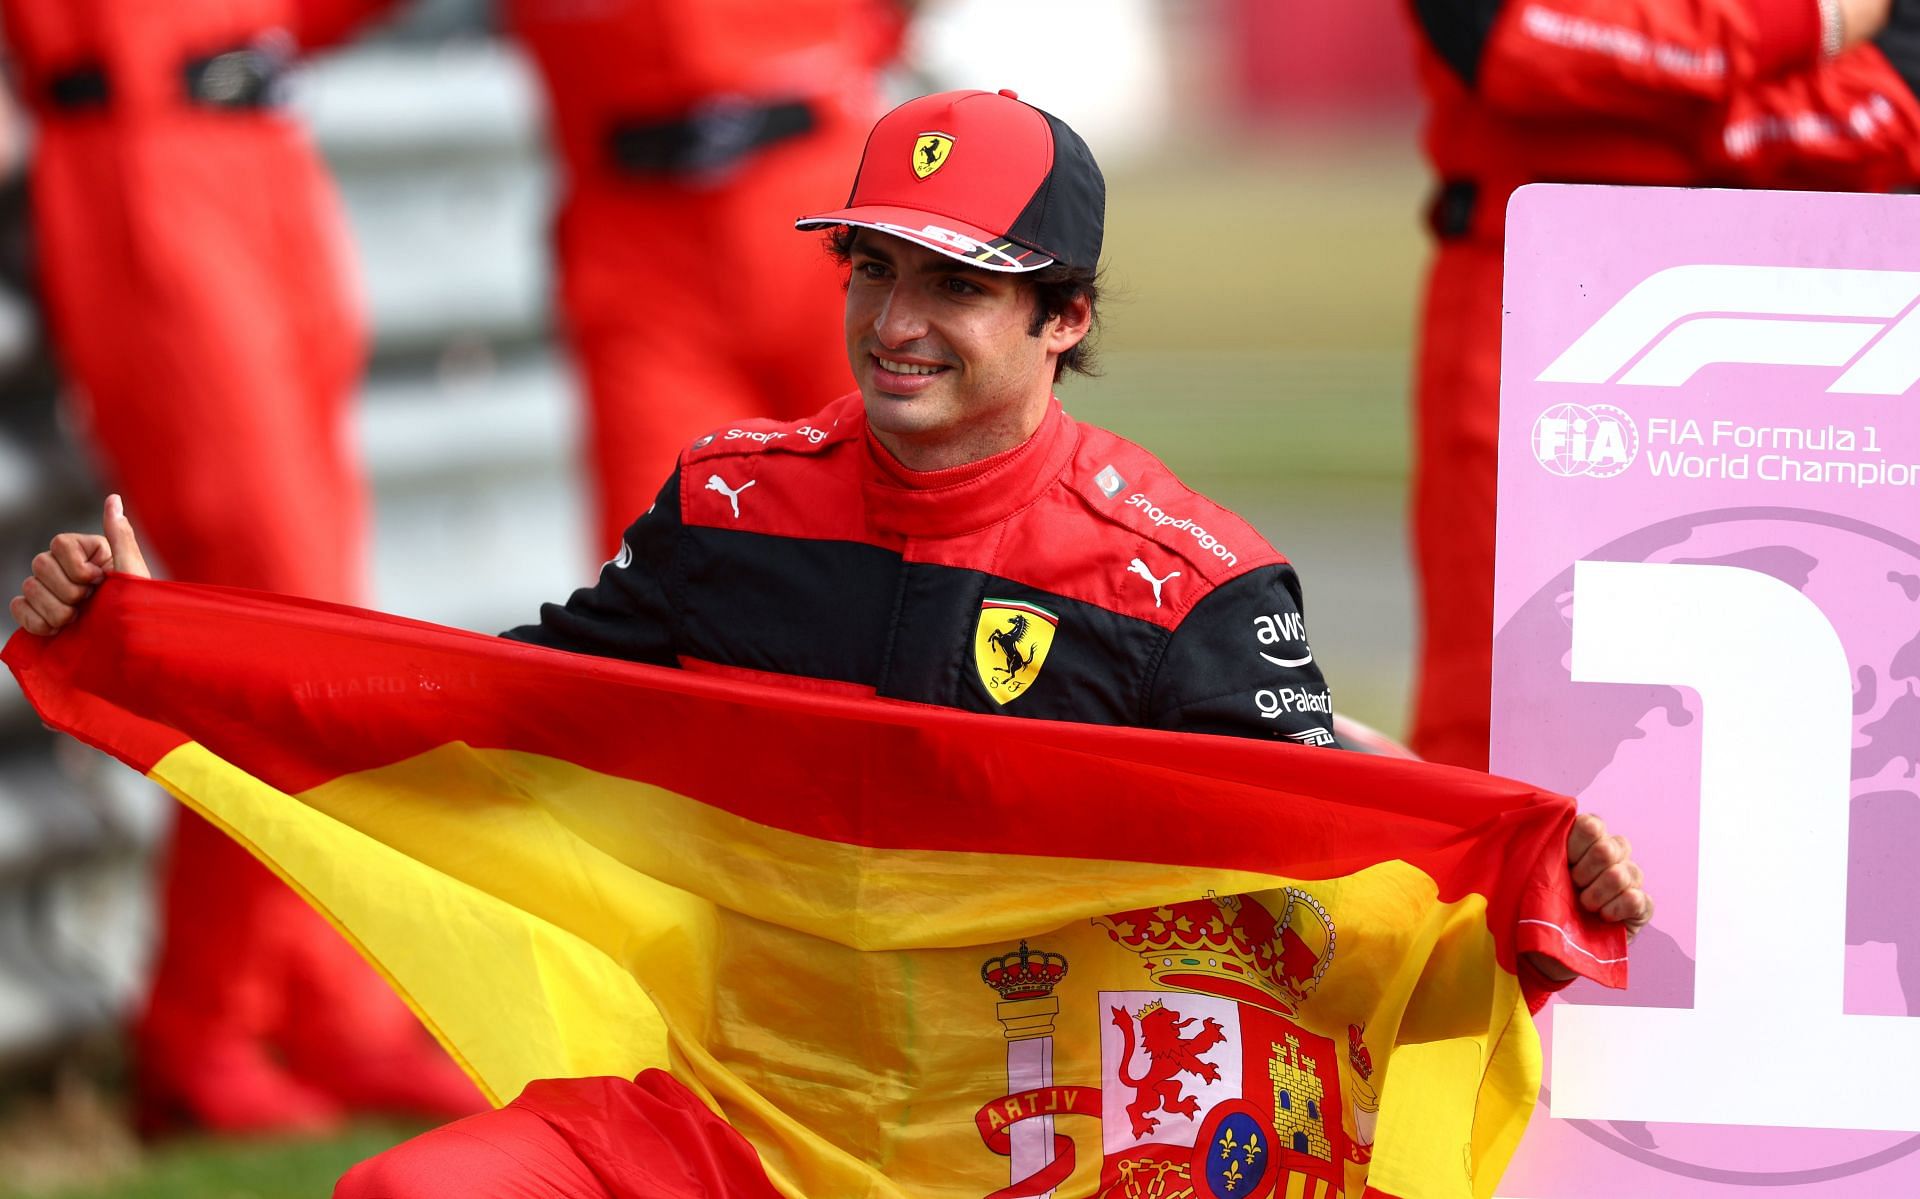 Carlos Sainz celebrates in parc ferm&eacute; after winning the 2022 F1 British GP (Photo by Clive Rose/Getty Images)